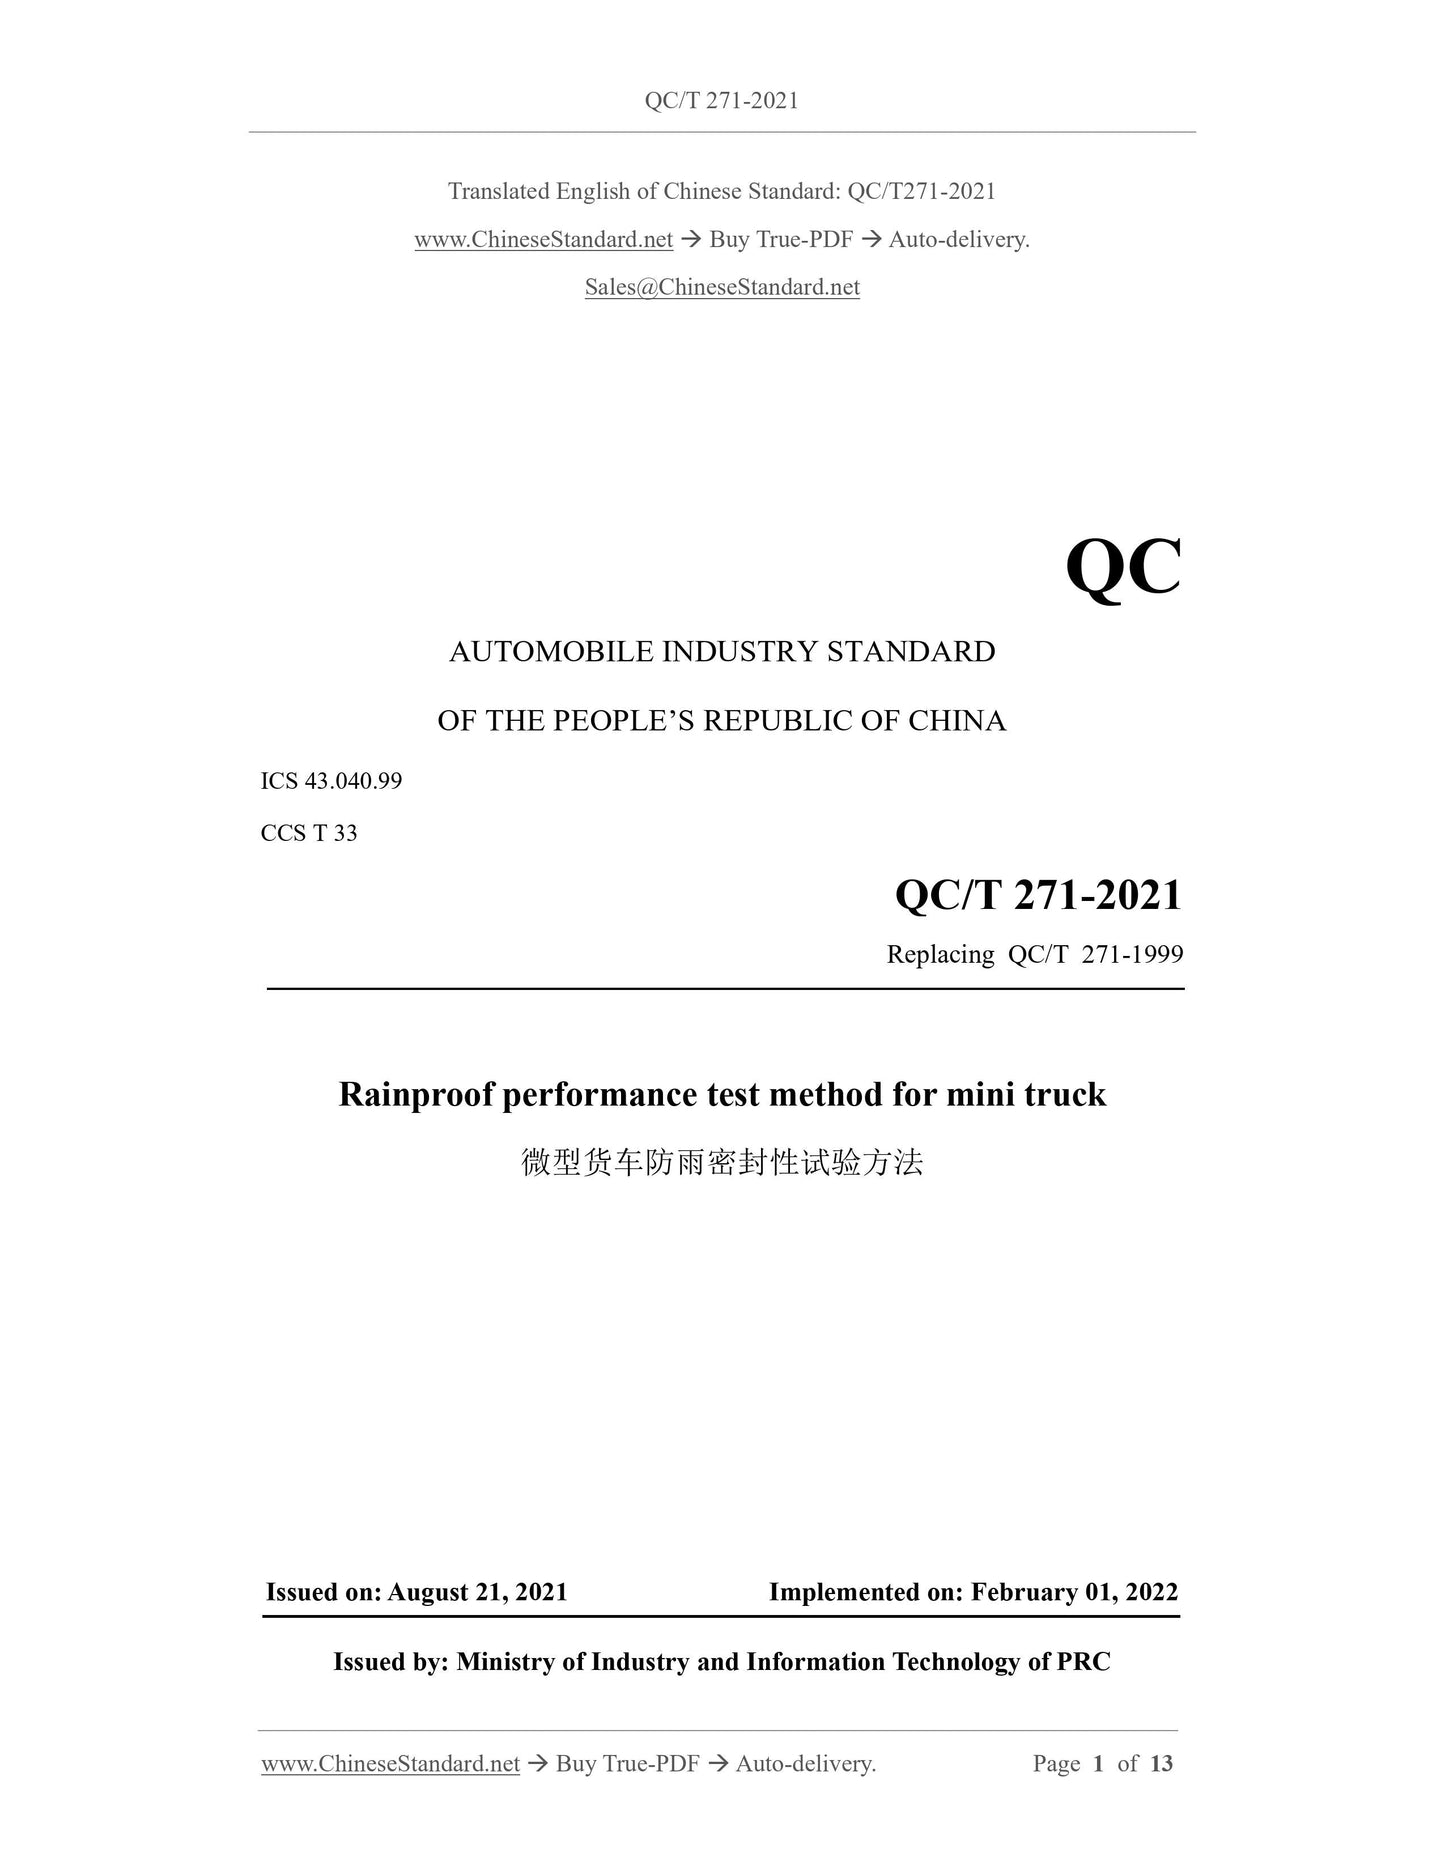 QC/T 271-2021 Page 1